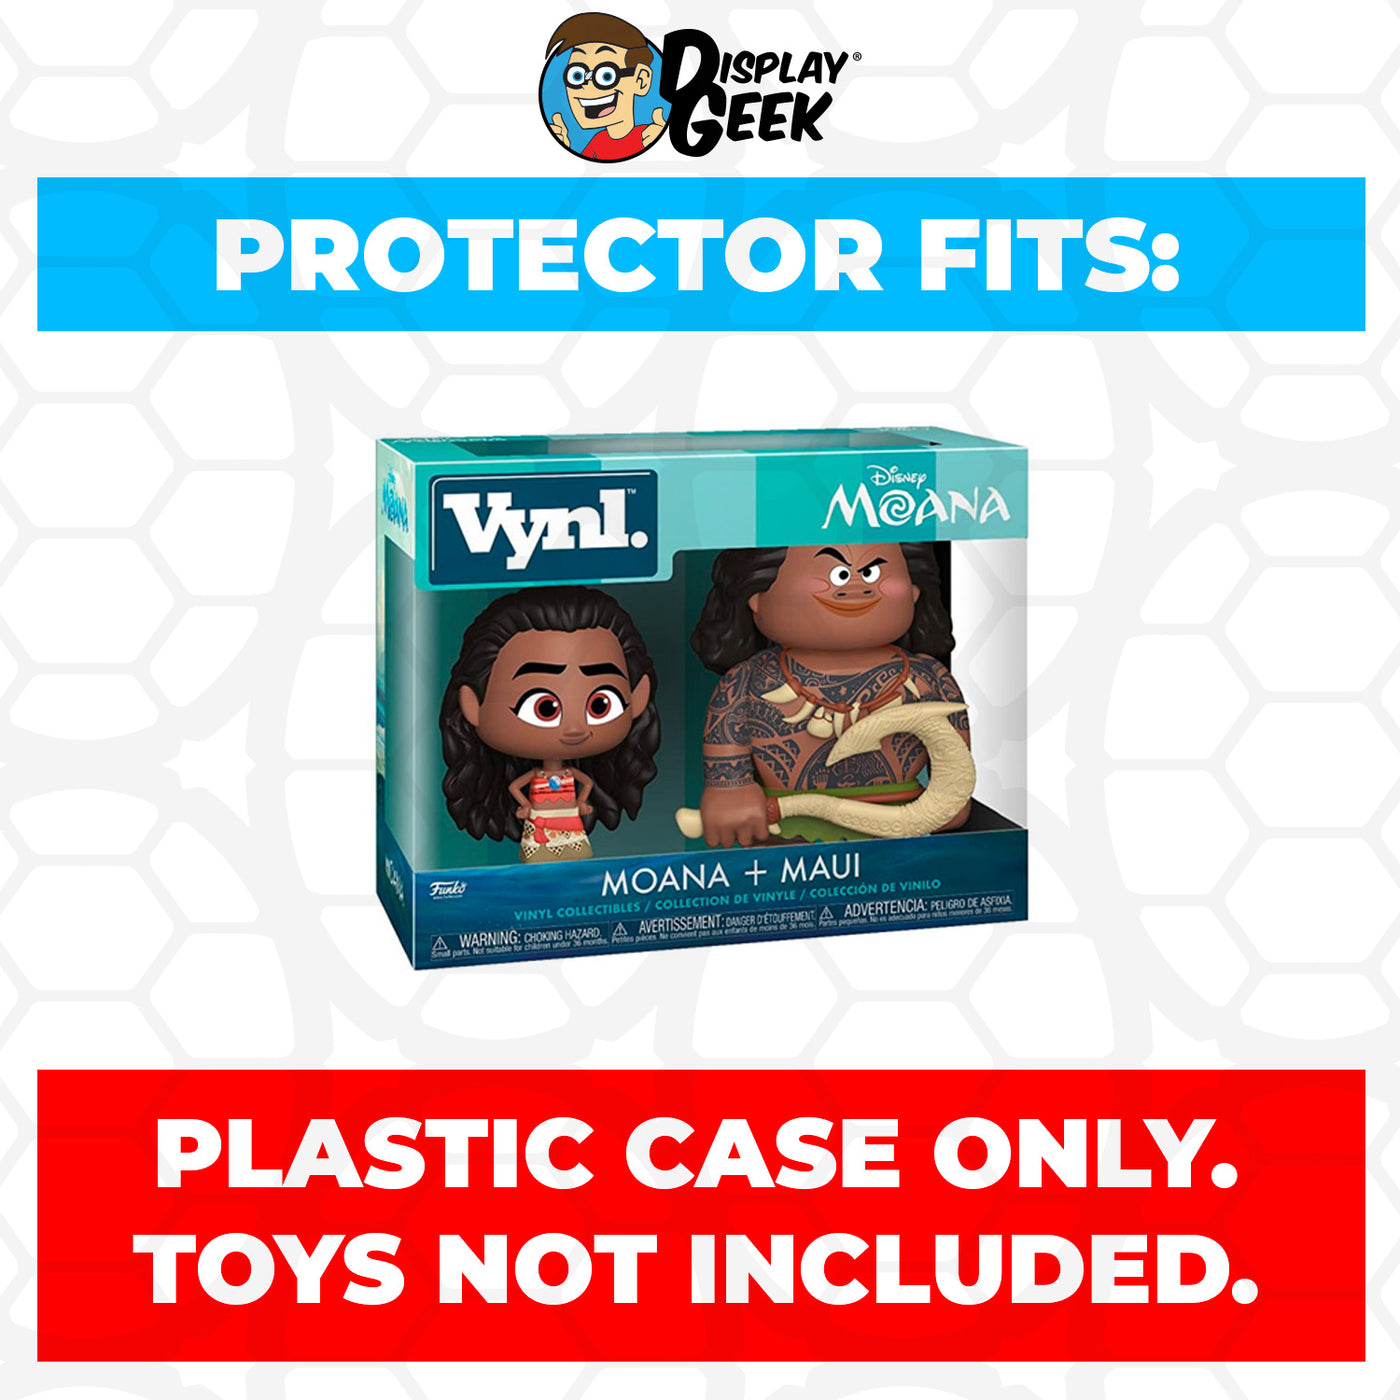 Pop Protector for Vynl 2 Pack Moana & Maui Funko on The Protector Guide App by Display Geek